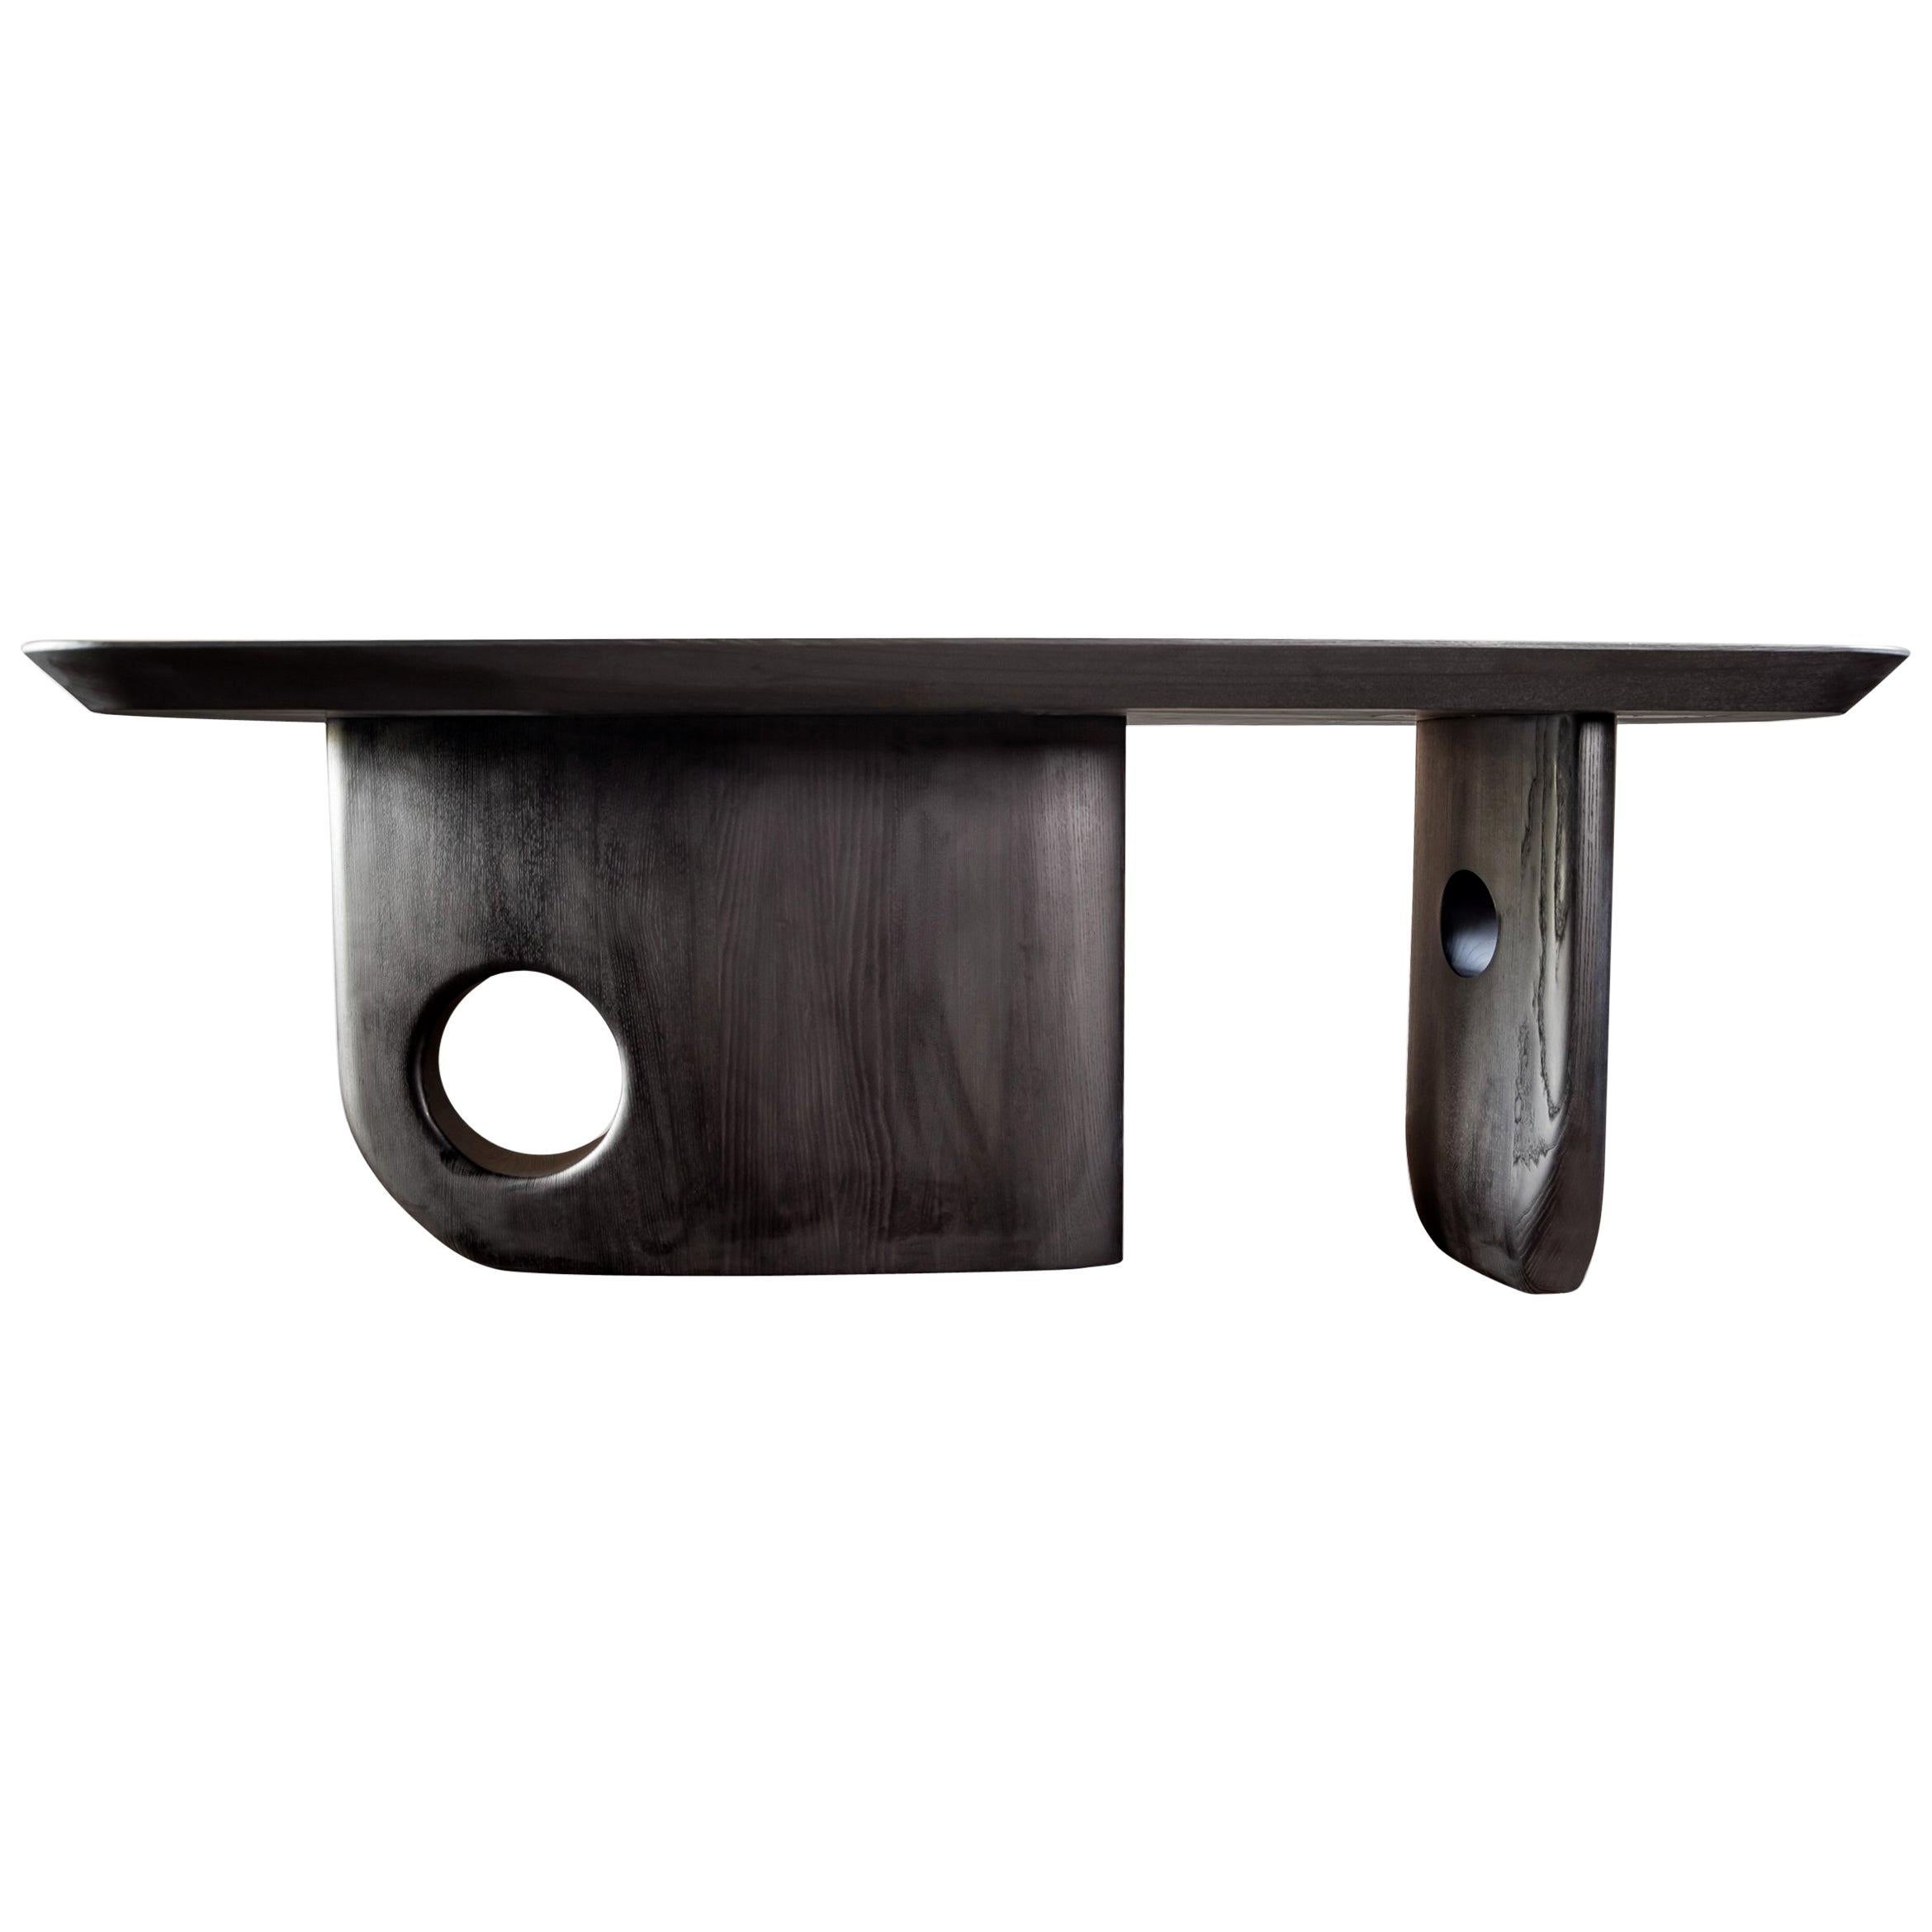 Organic bespoke - Menhir Sculptural Table/Desk Designed by Toad Gallery London For Sale